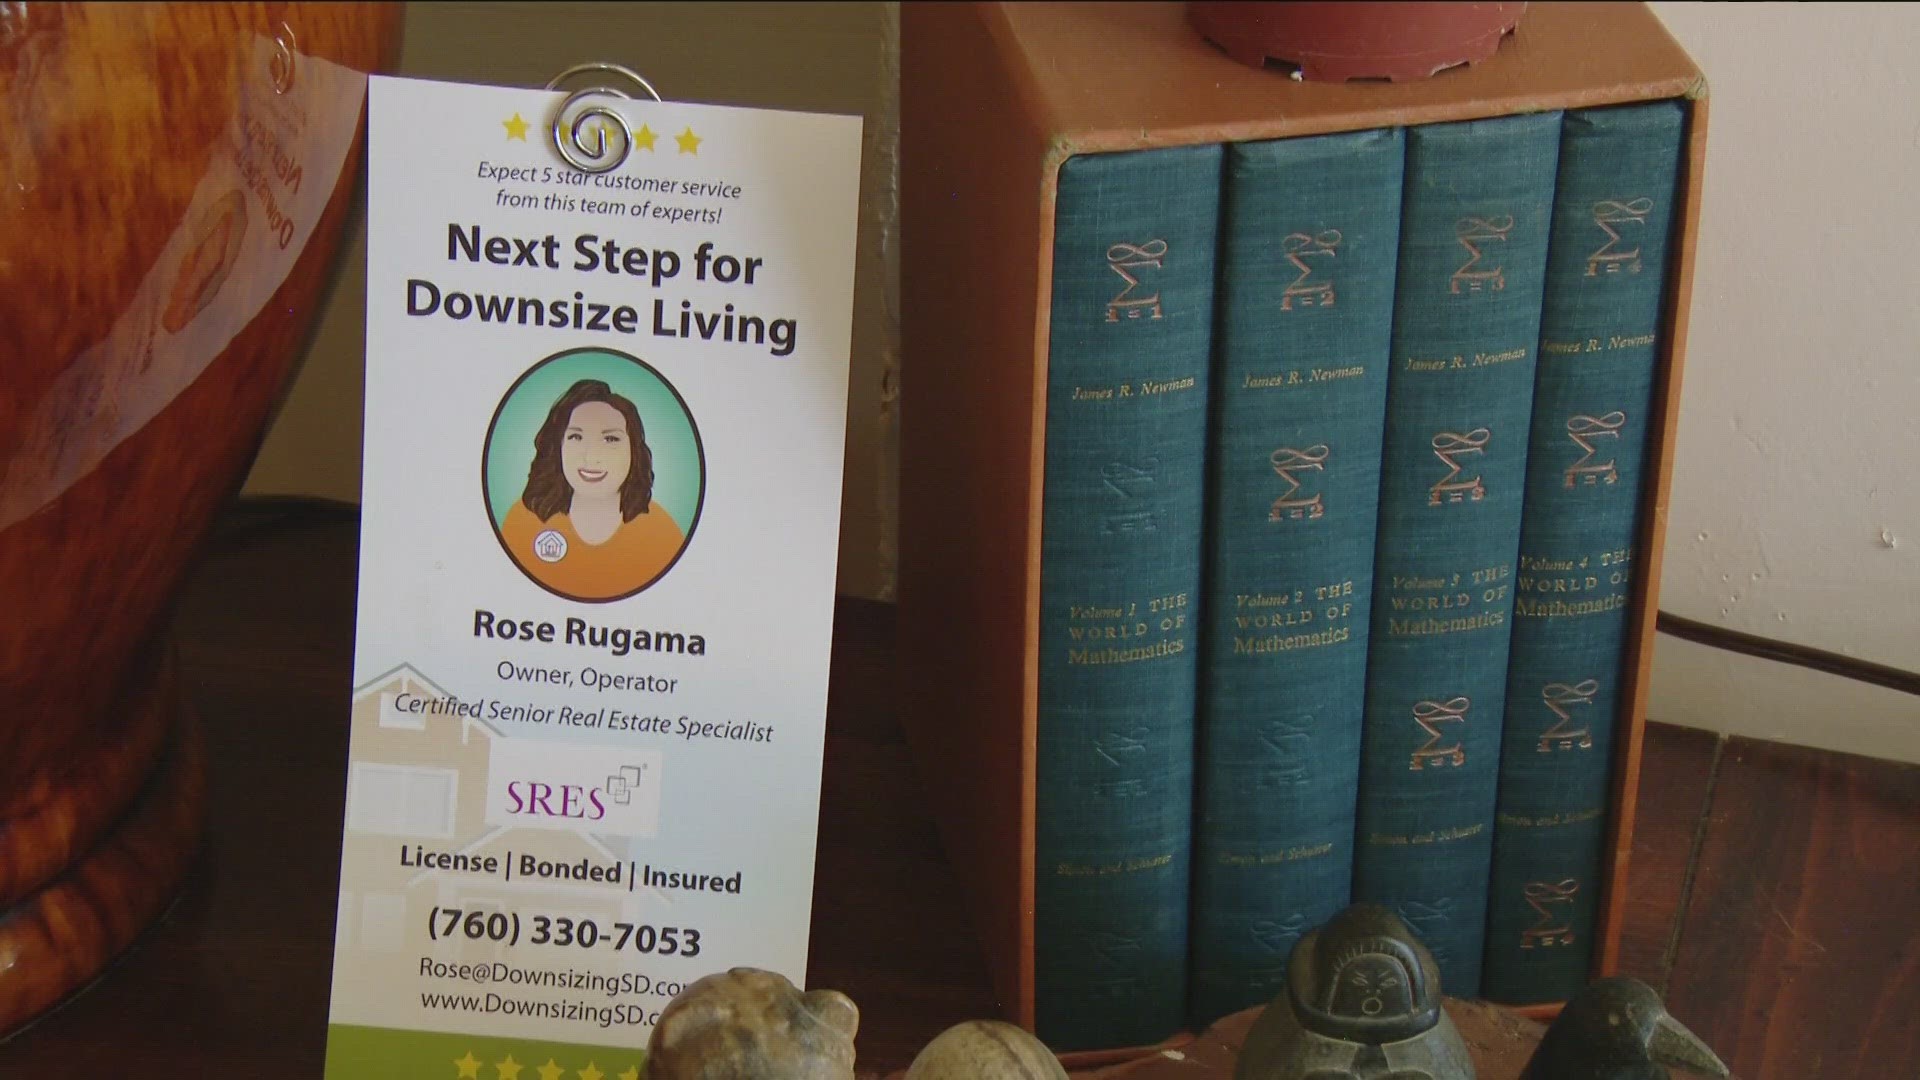 This store helps empty nesters, the elderly and those downsizing with the challenges ahead.